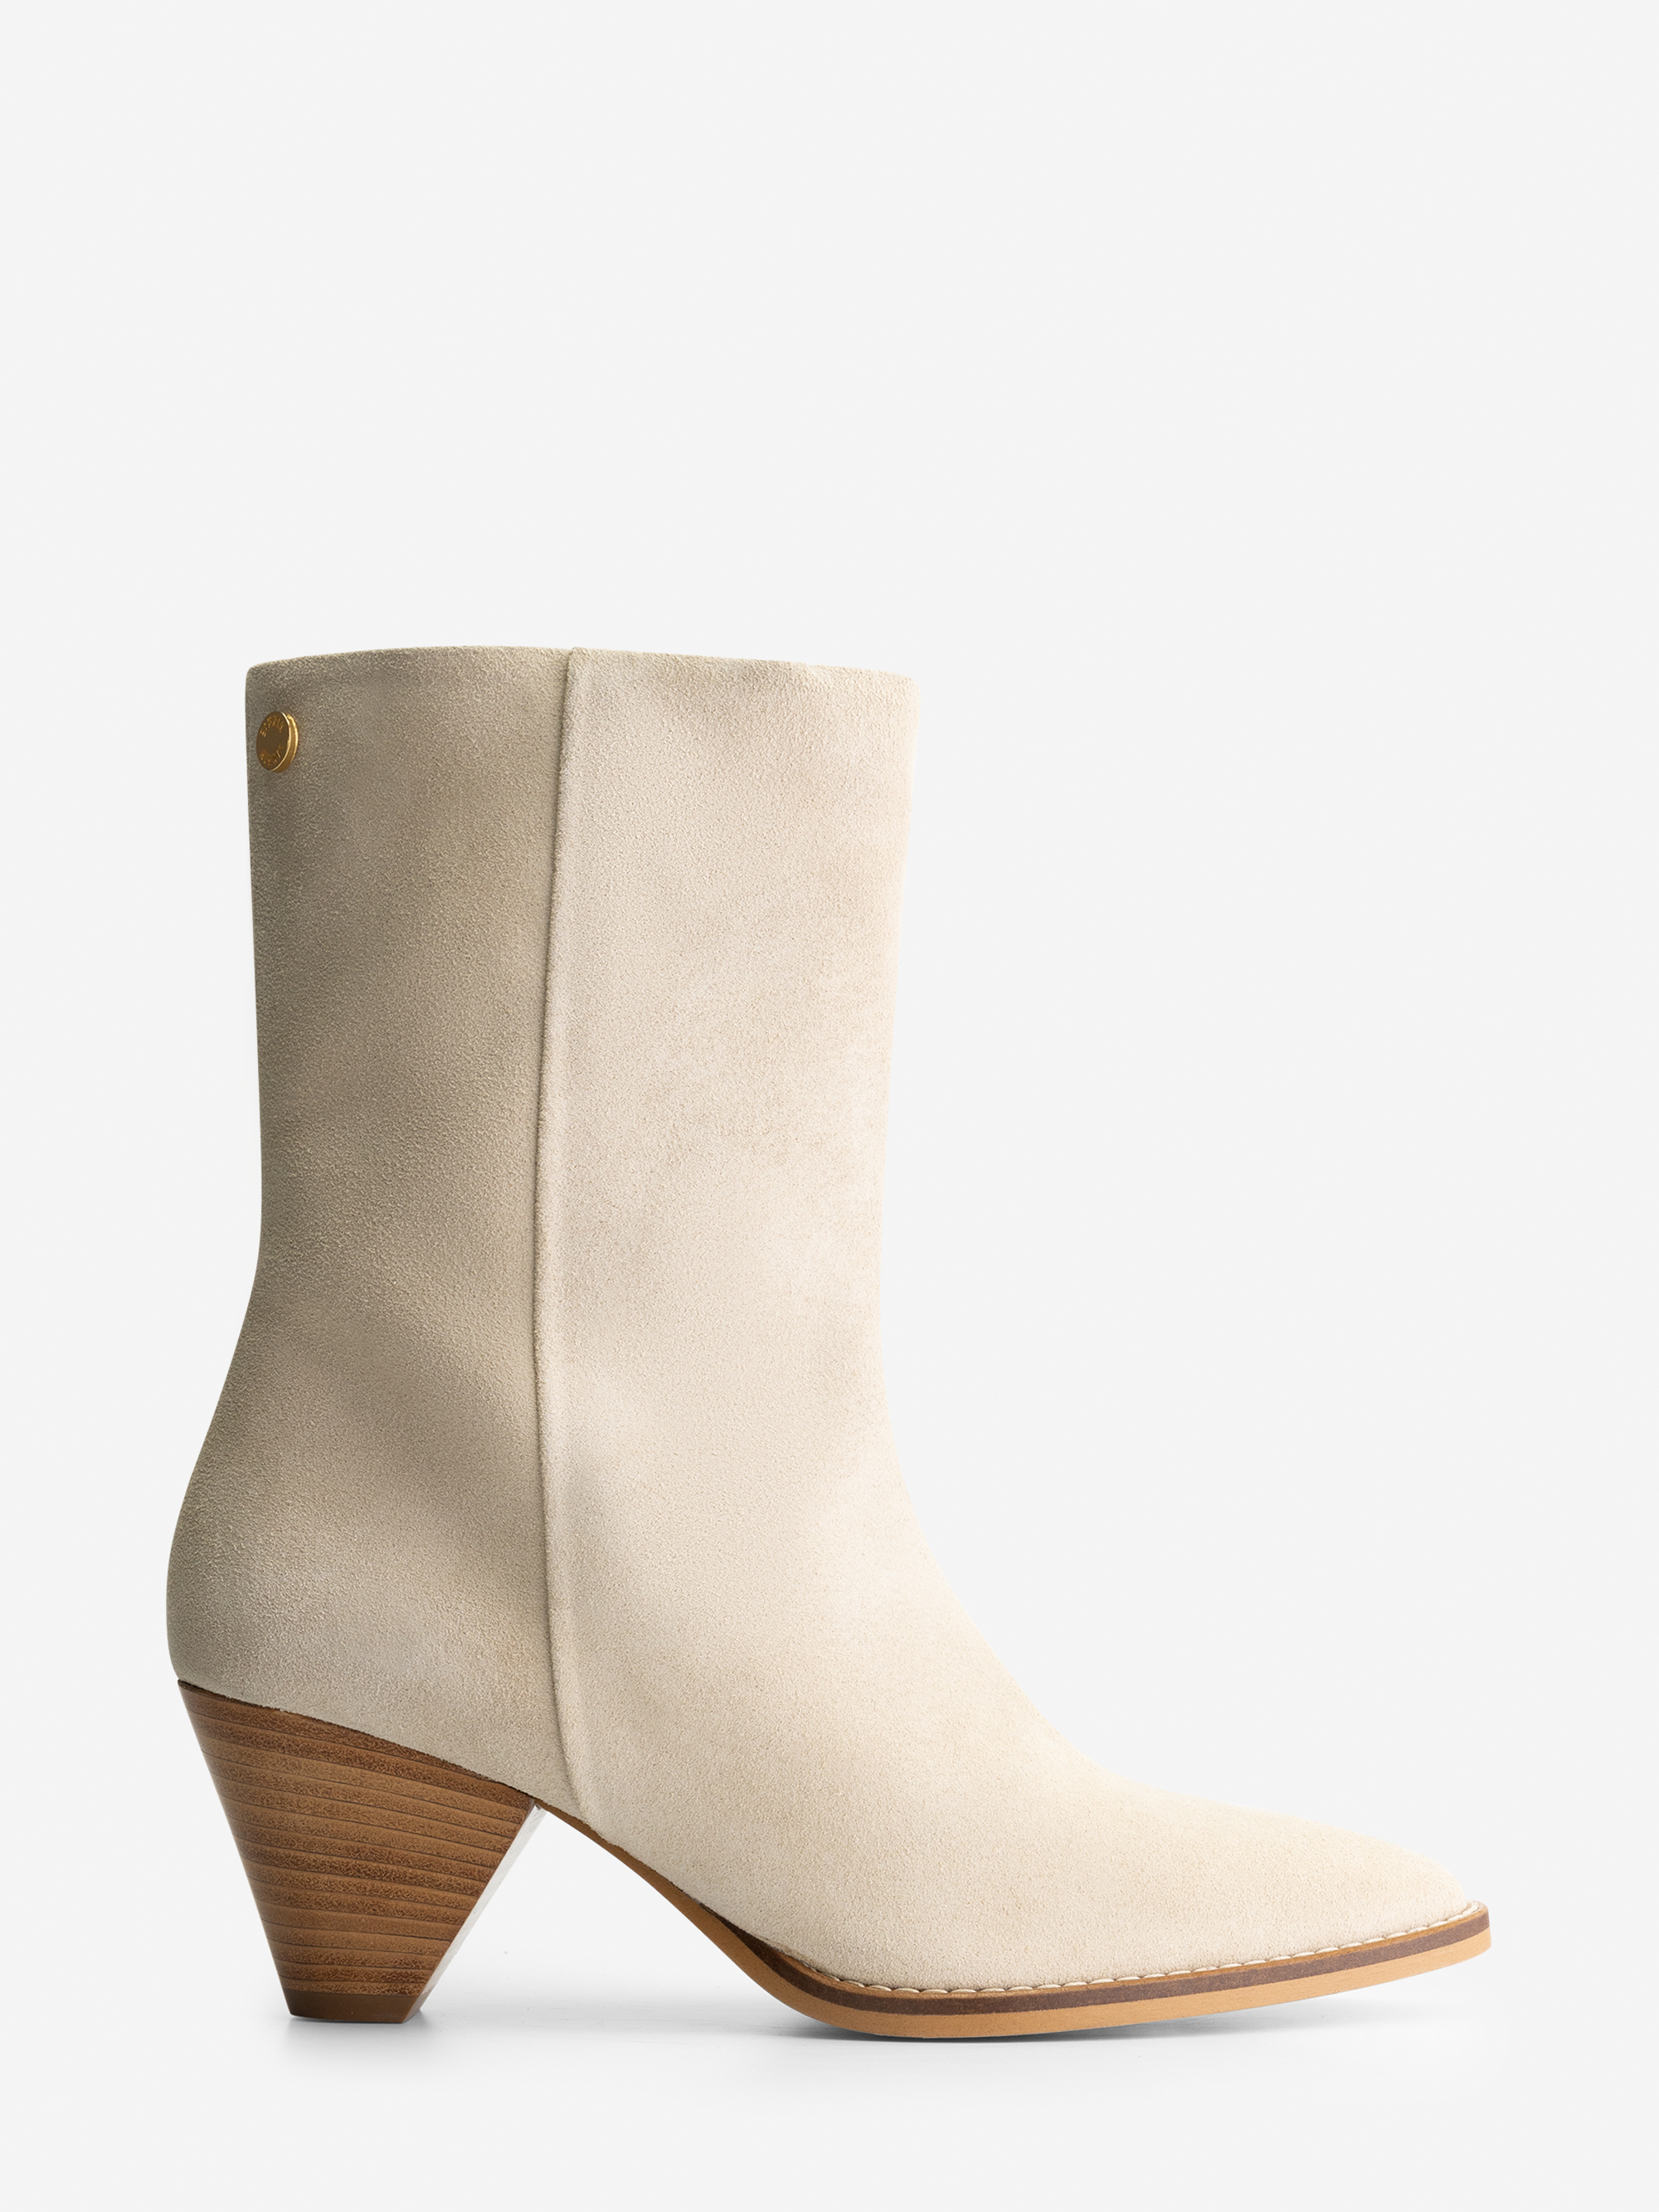 Ankle boots with heel